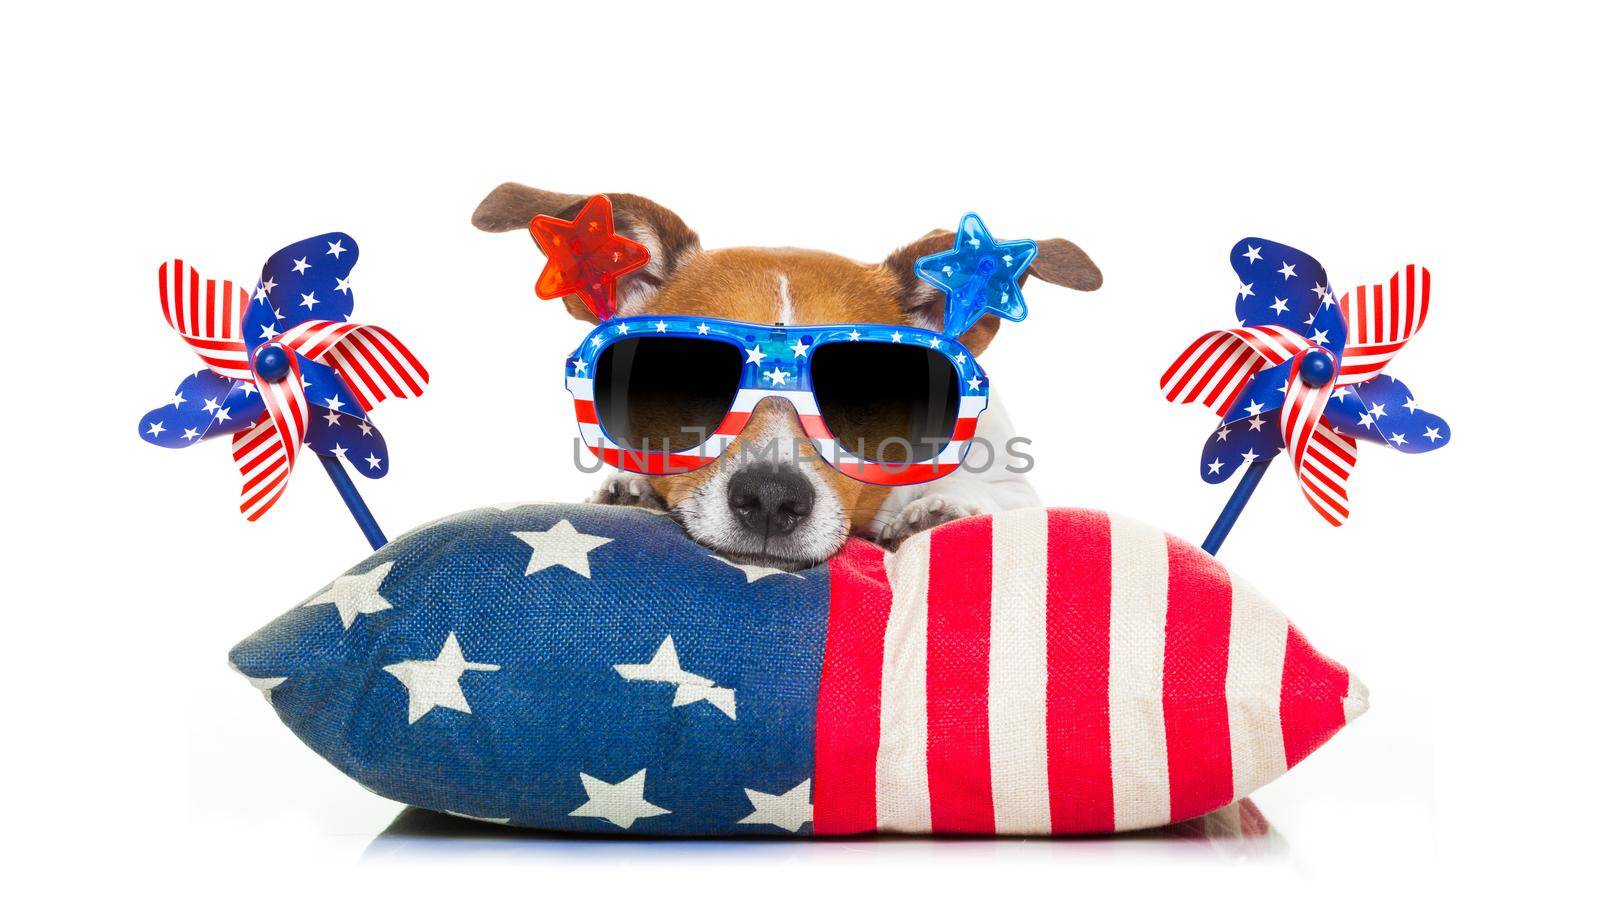 jack russell dog celebrating 4th of july independence day holidays with american flags and sunglasses, isolated on white background